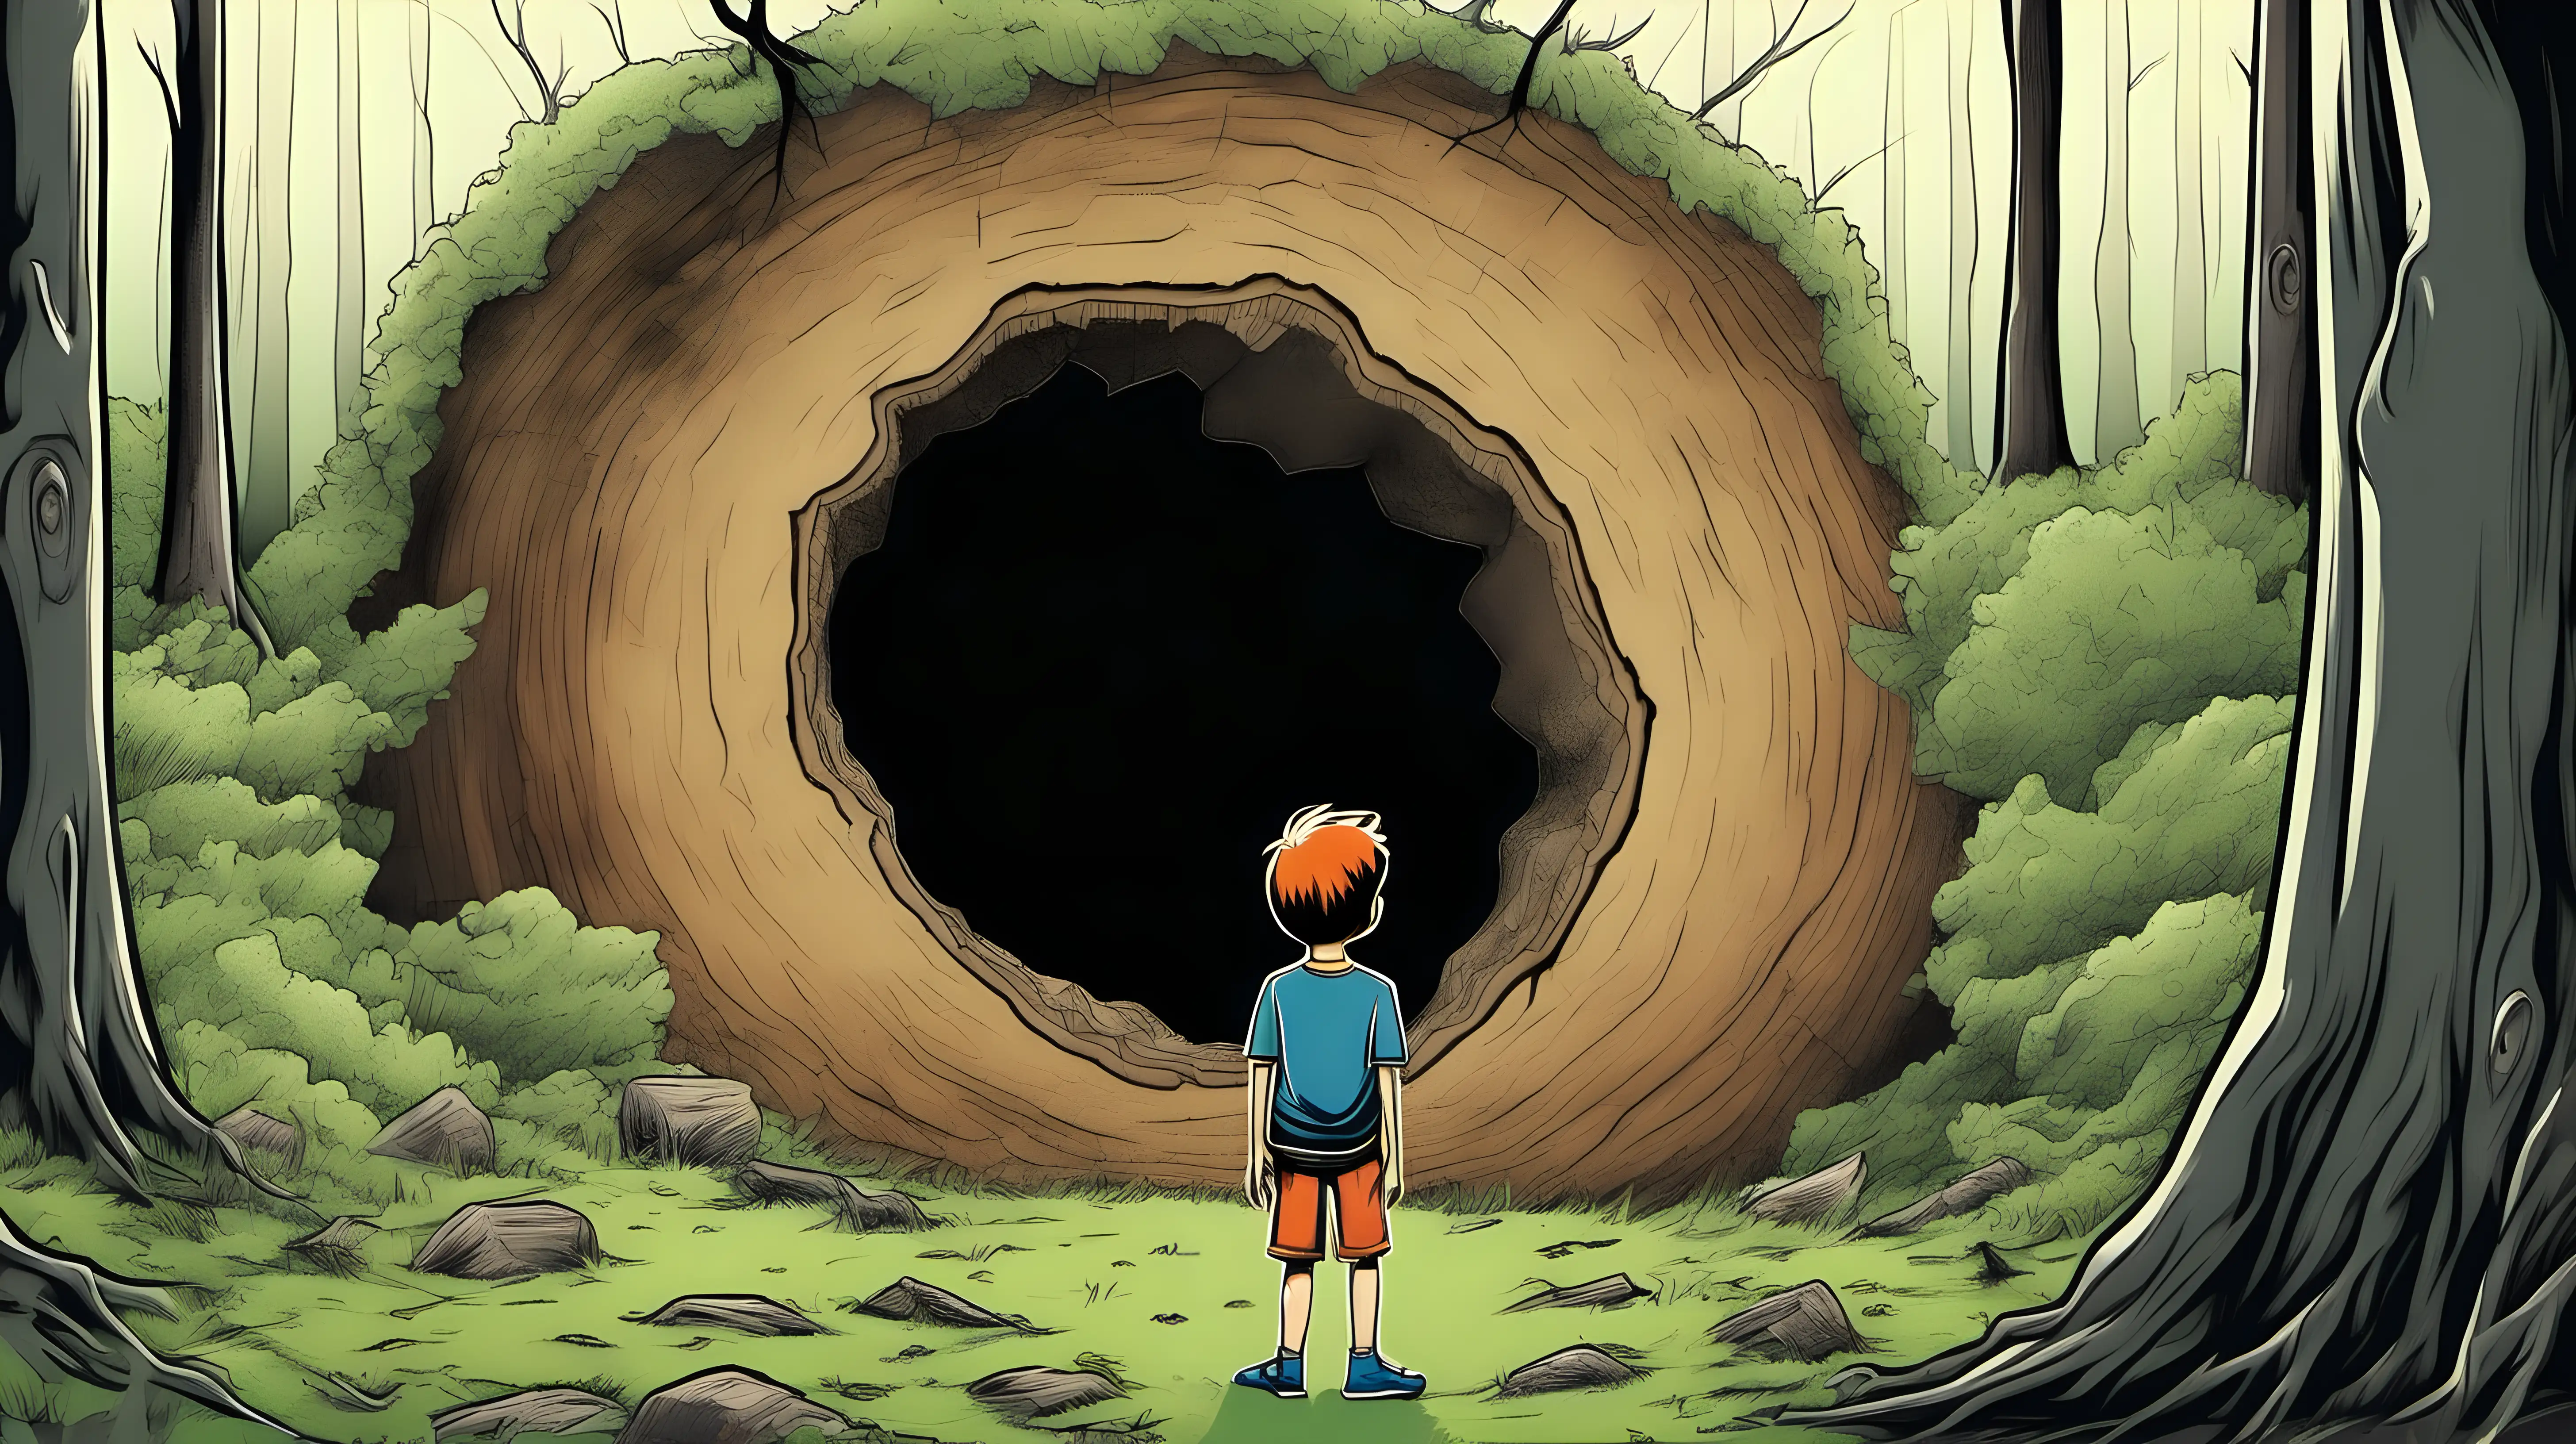 Boy Pointing to Enormous Hollow Tree in Forest